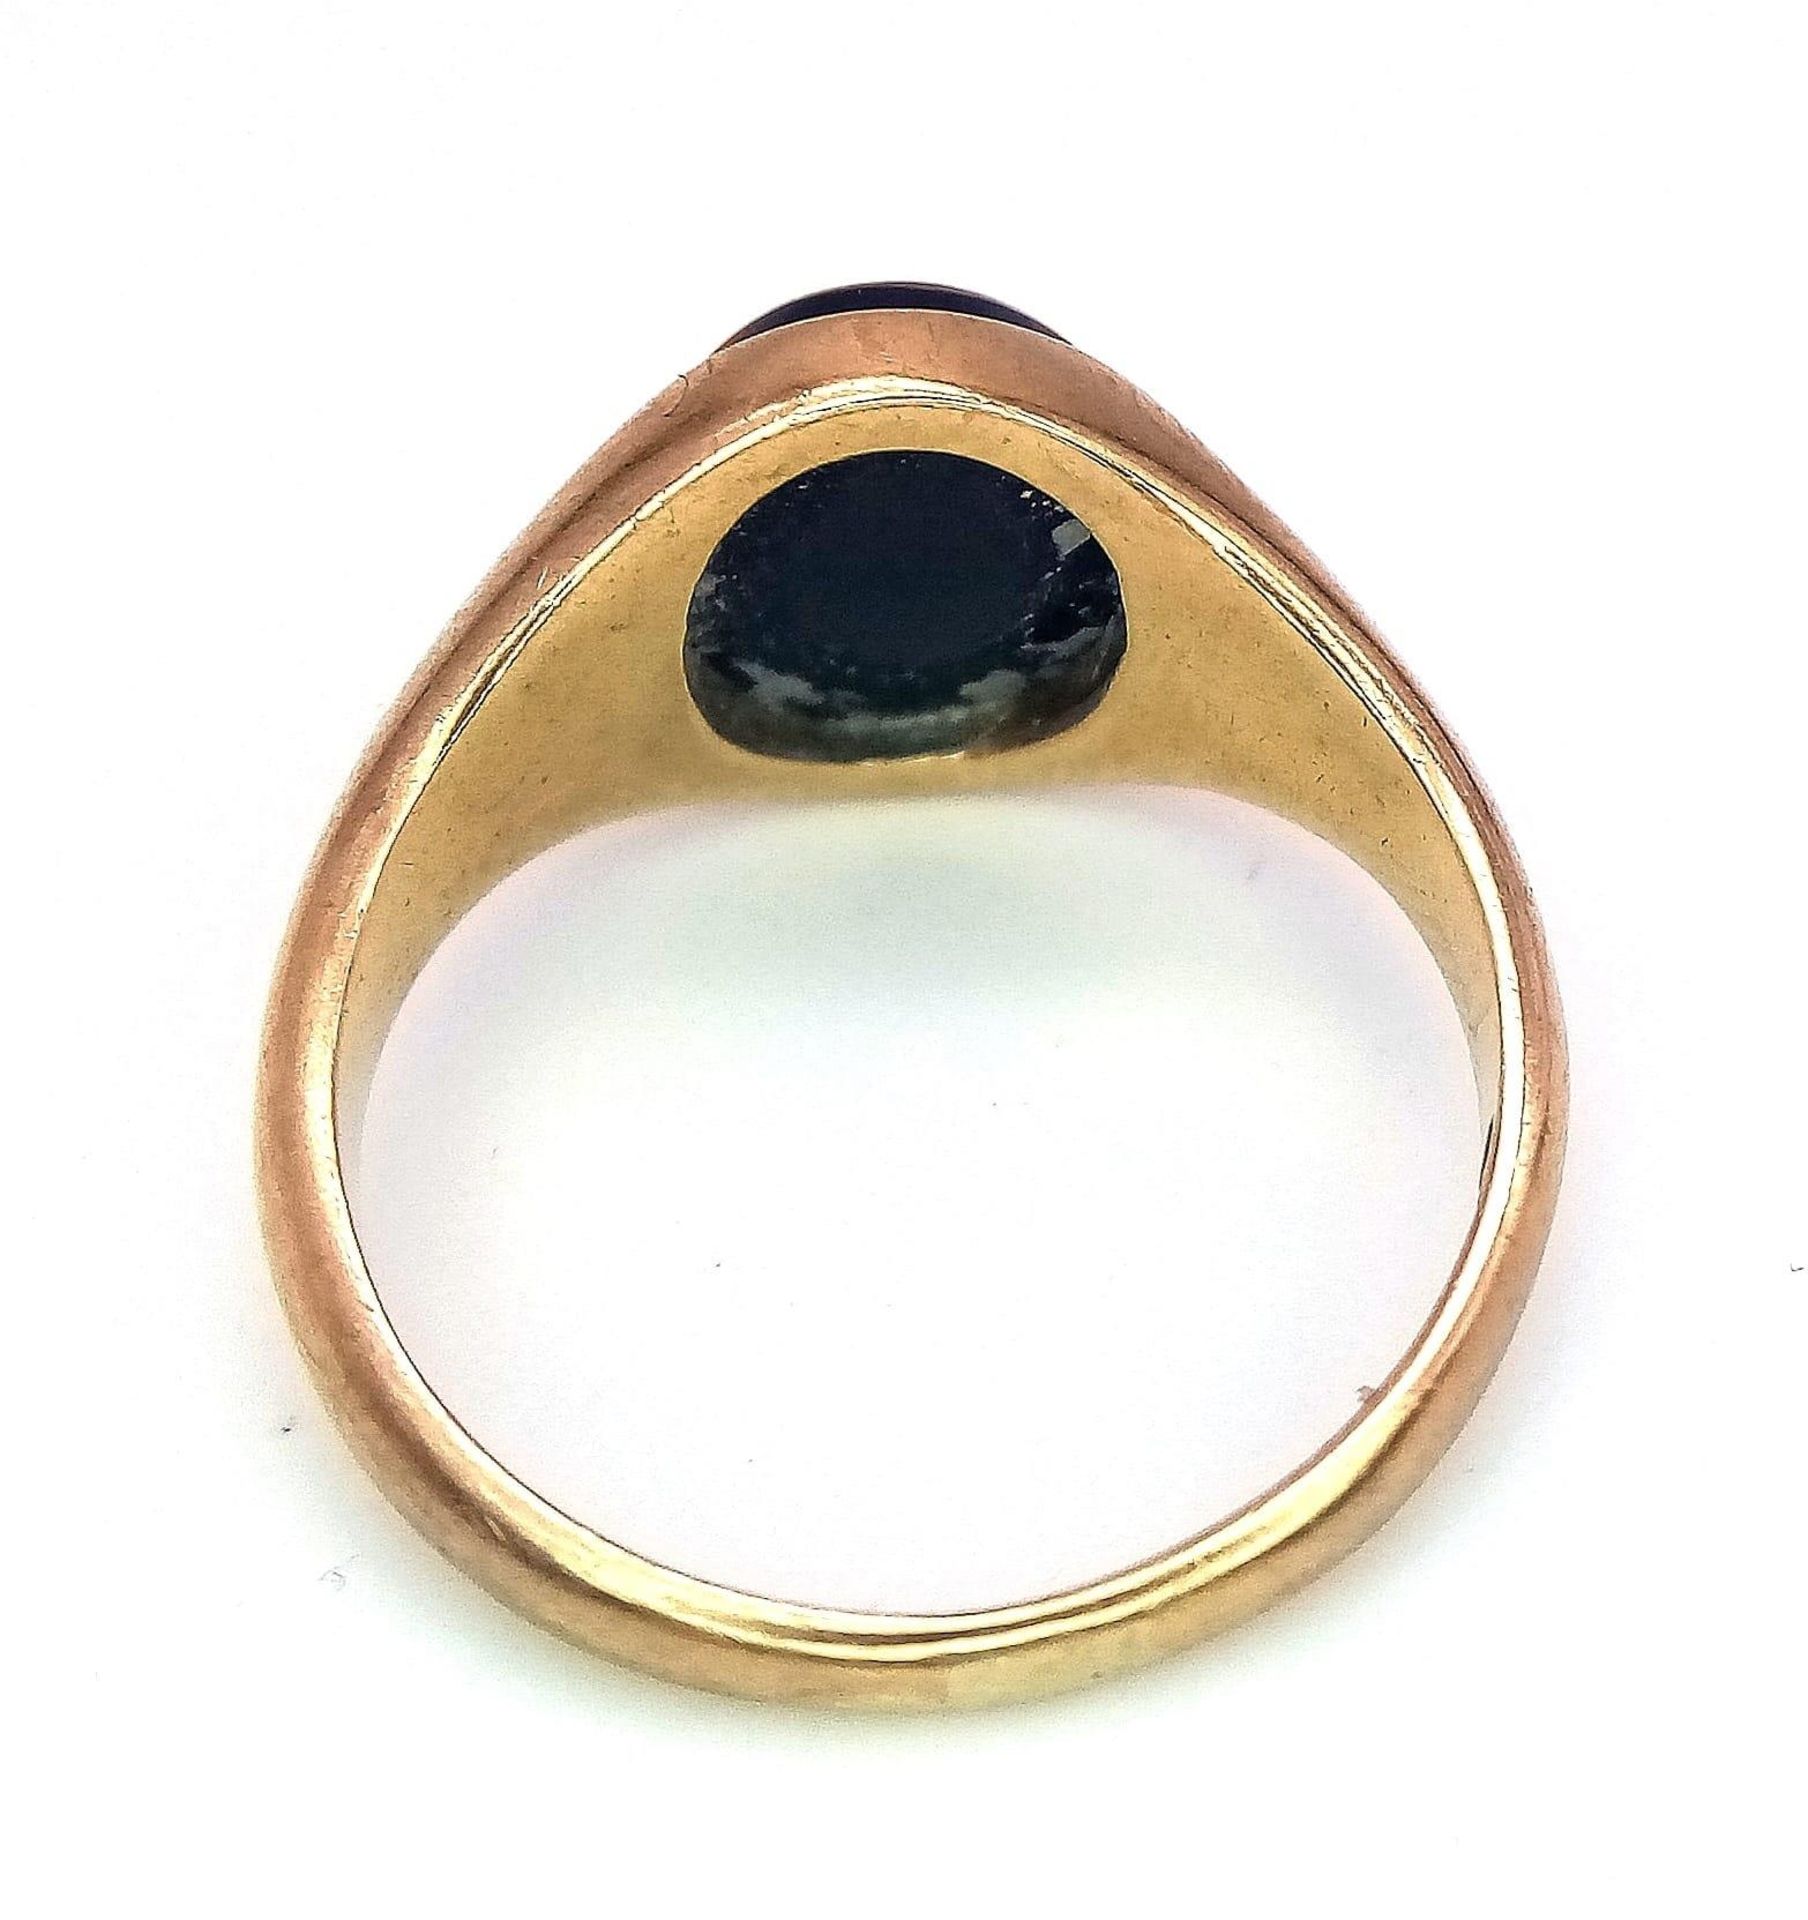 A 9K GOLD RING WITH OVAL BLACK ONYX STONE . 3.6gms size L - Image 6 of 12